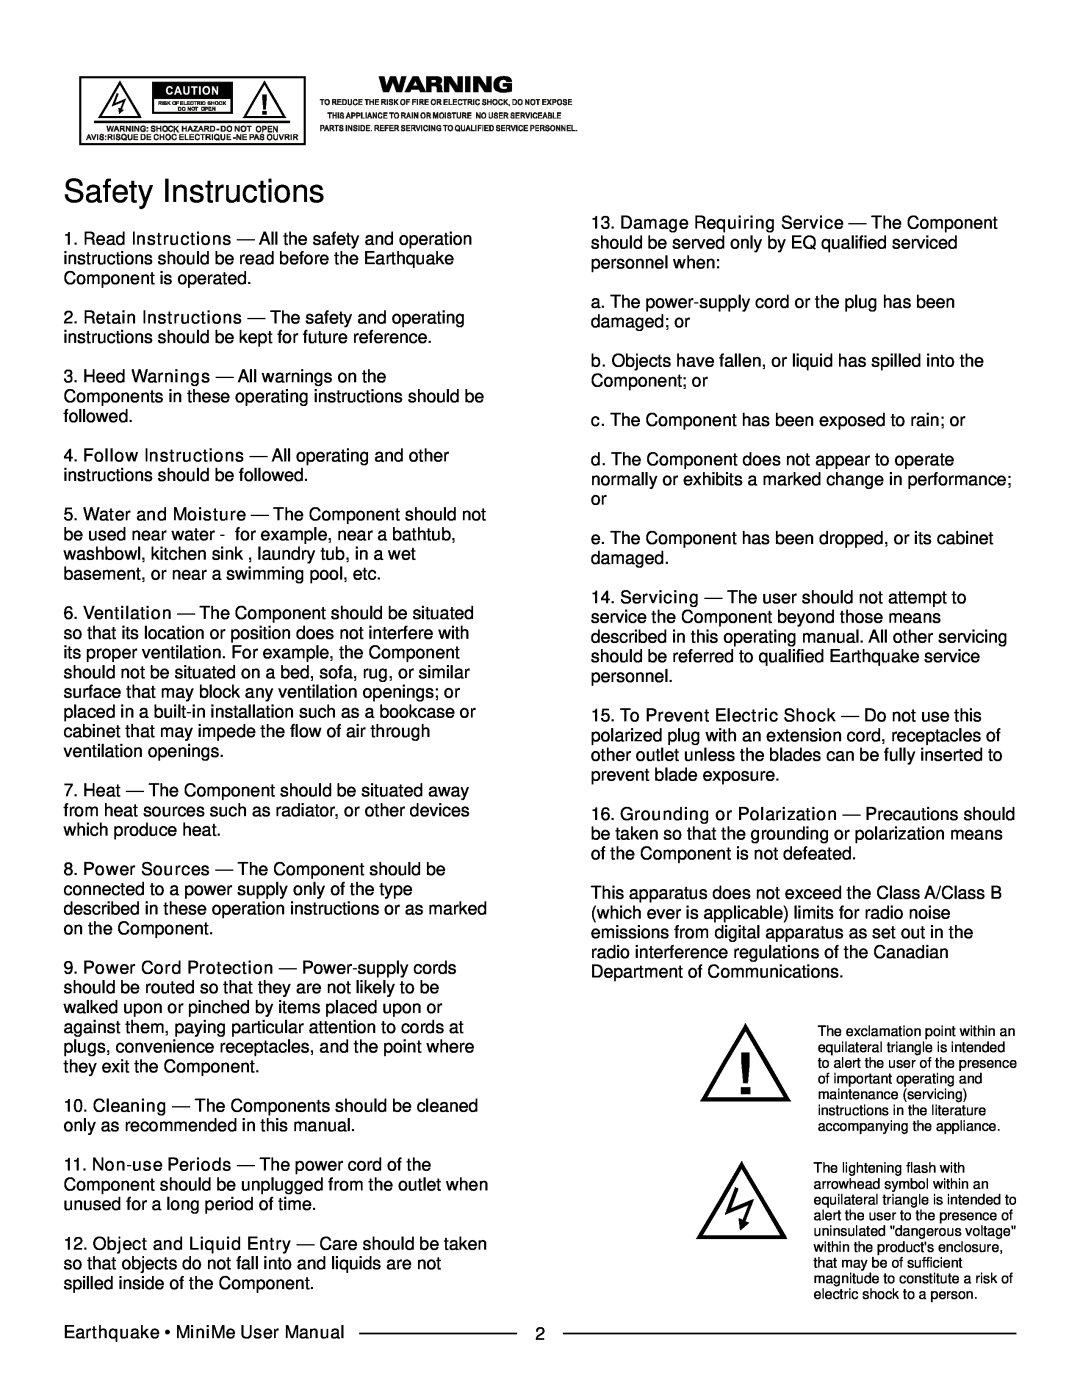 Earthquake Sound FF8 manual Safety Instructions 